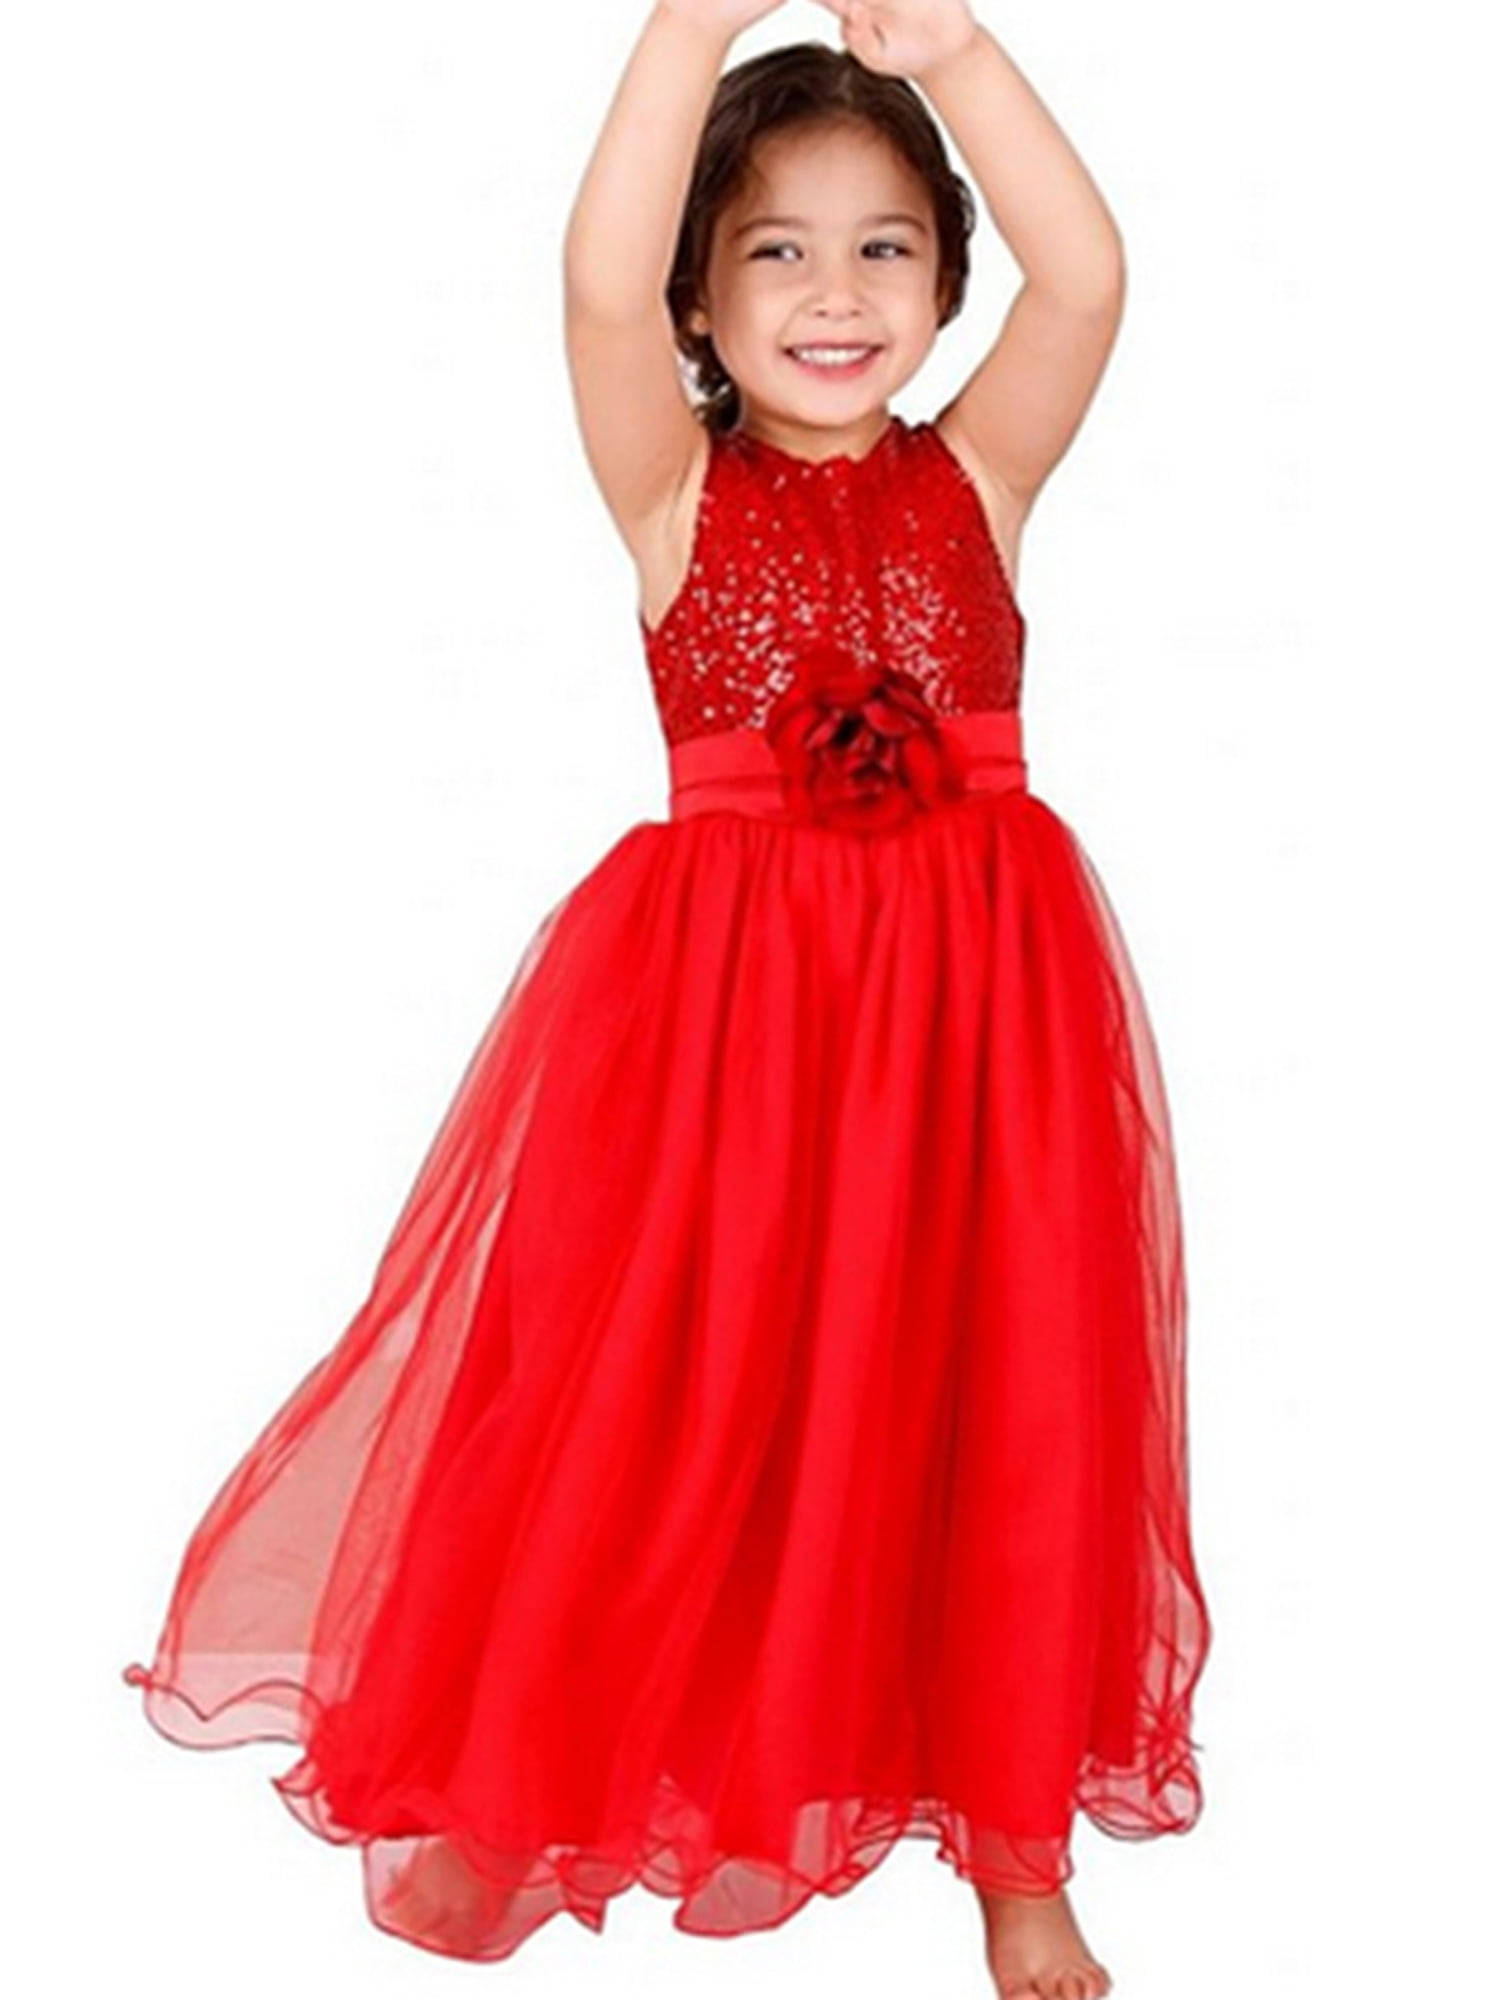 Girls Kids Baby Flower Party Sequins Dress Princess Occasion Wedding Bridesmaid